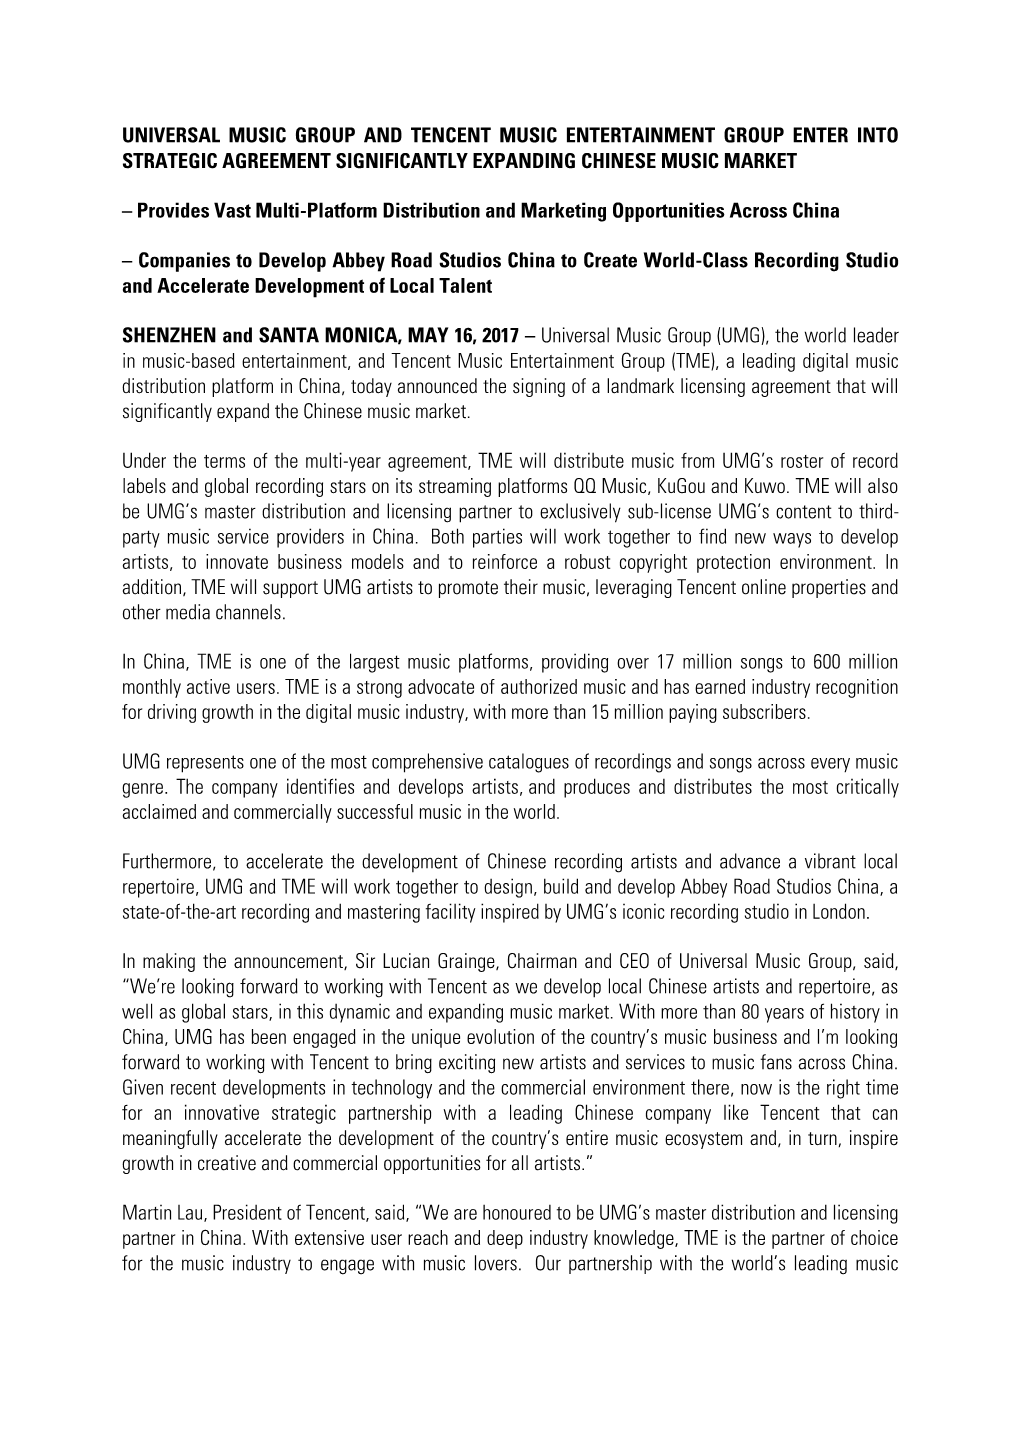 Universal Music Group and Tencent Music Entertainment Group Enter Into Strategic Agreement Significantly Expanding Chinese Music Market